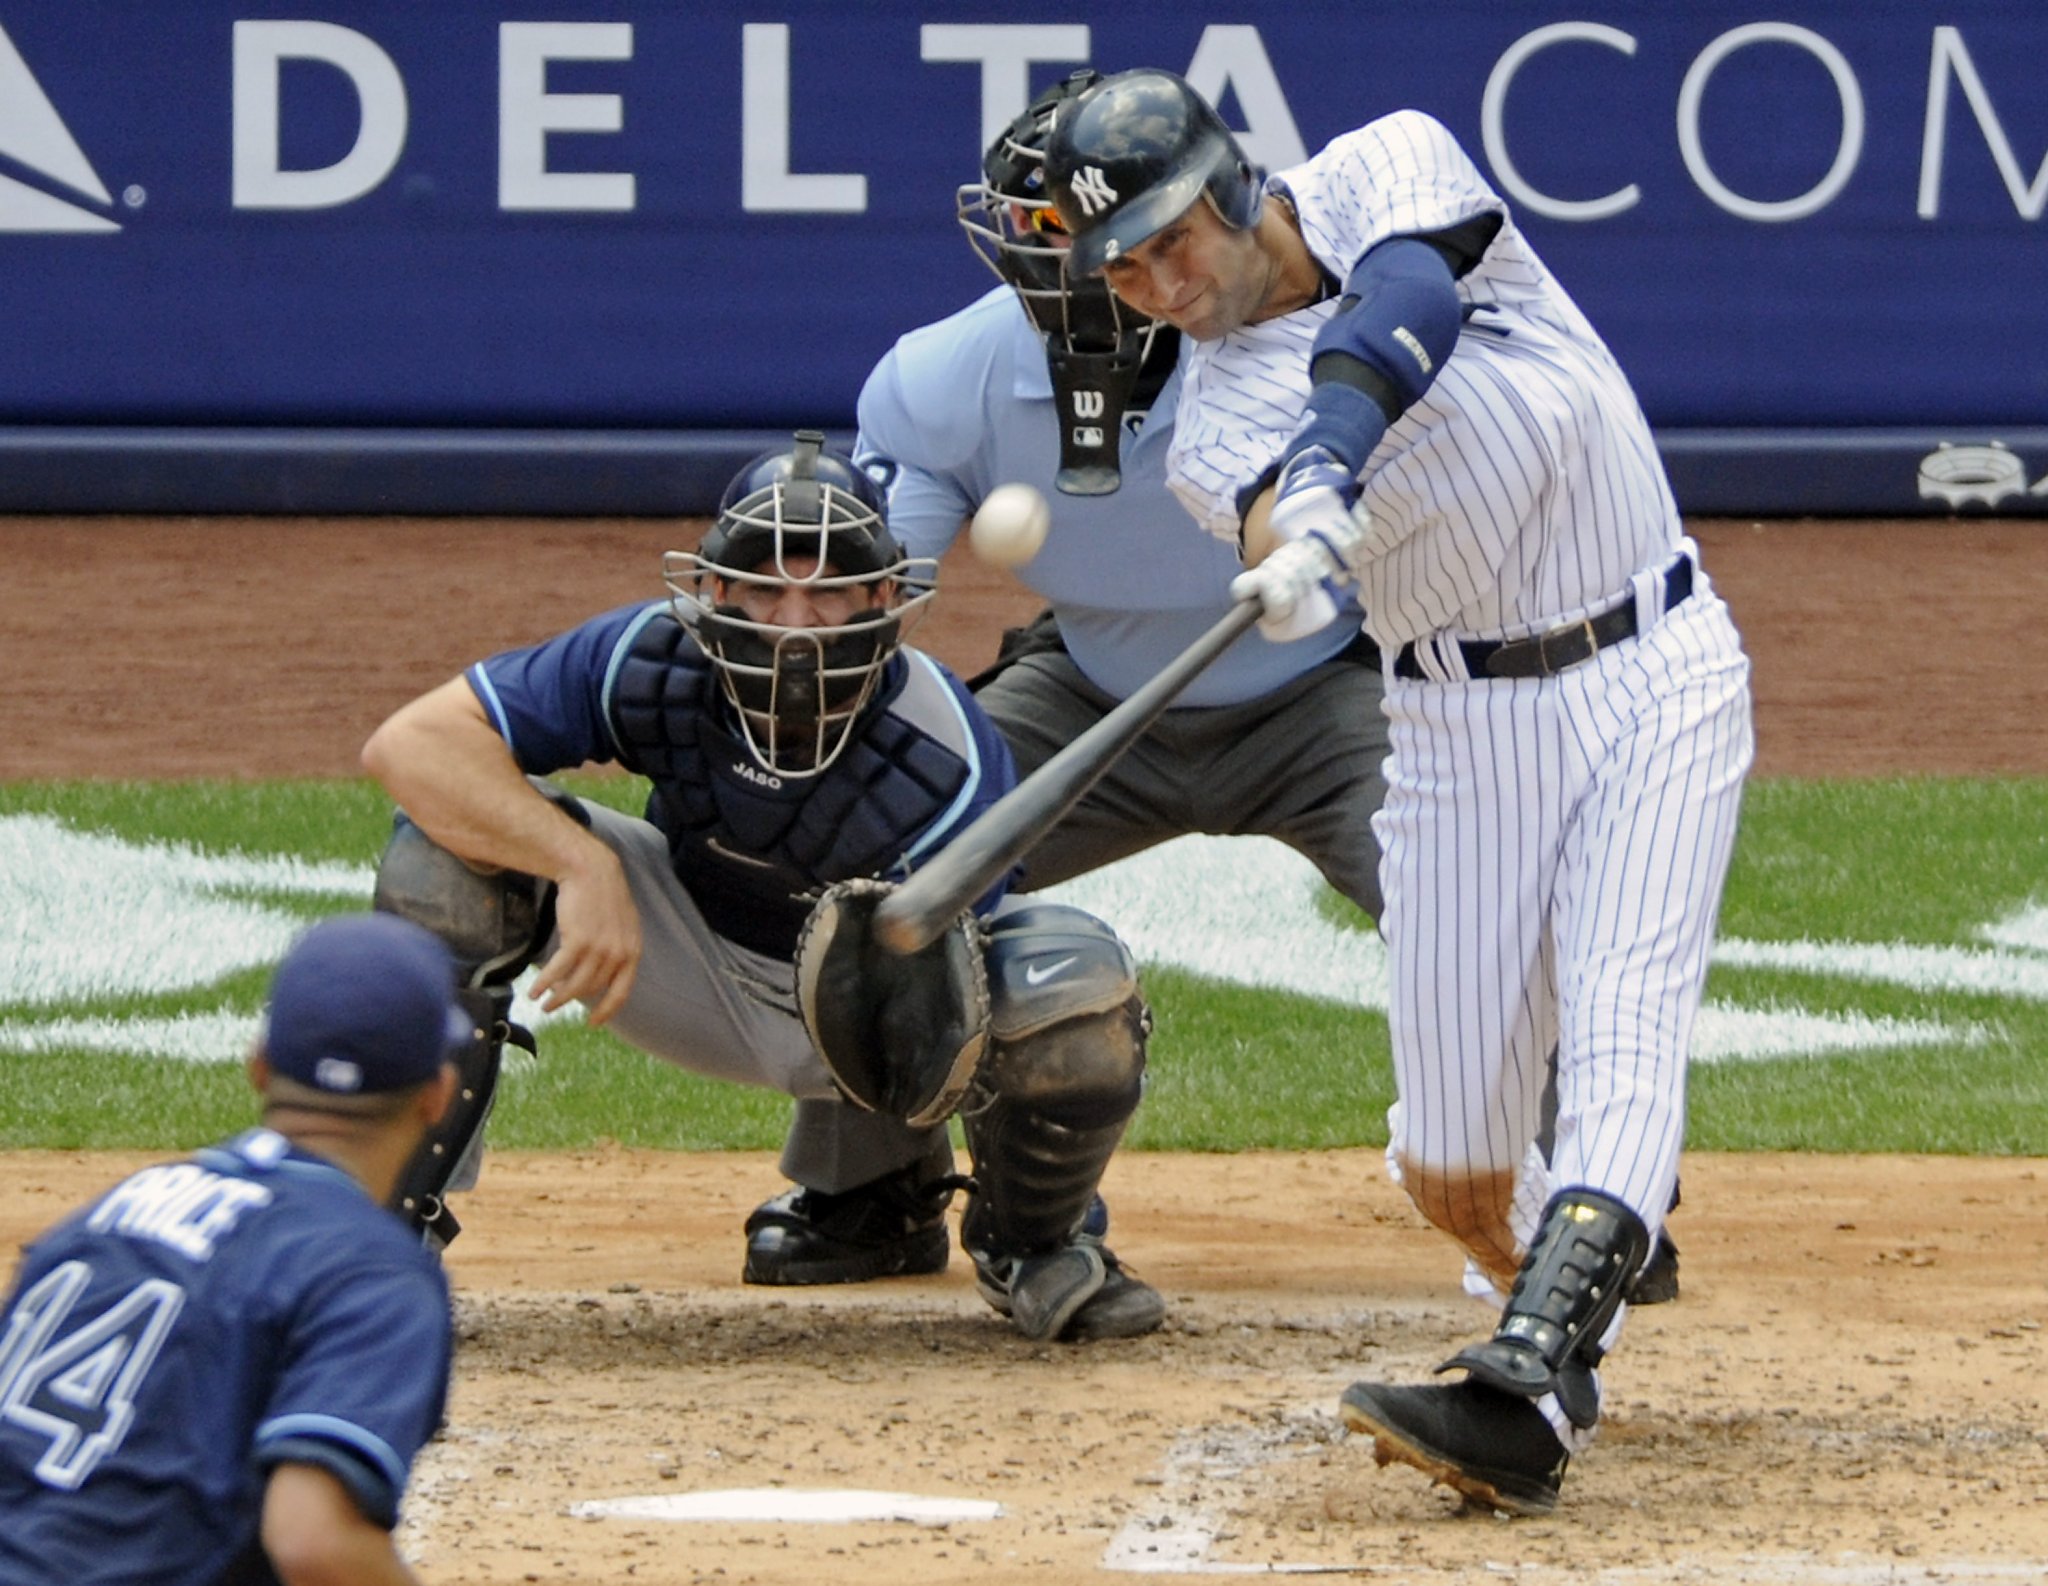 Jeter plays in minors